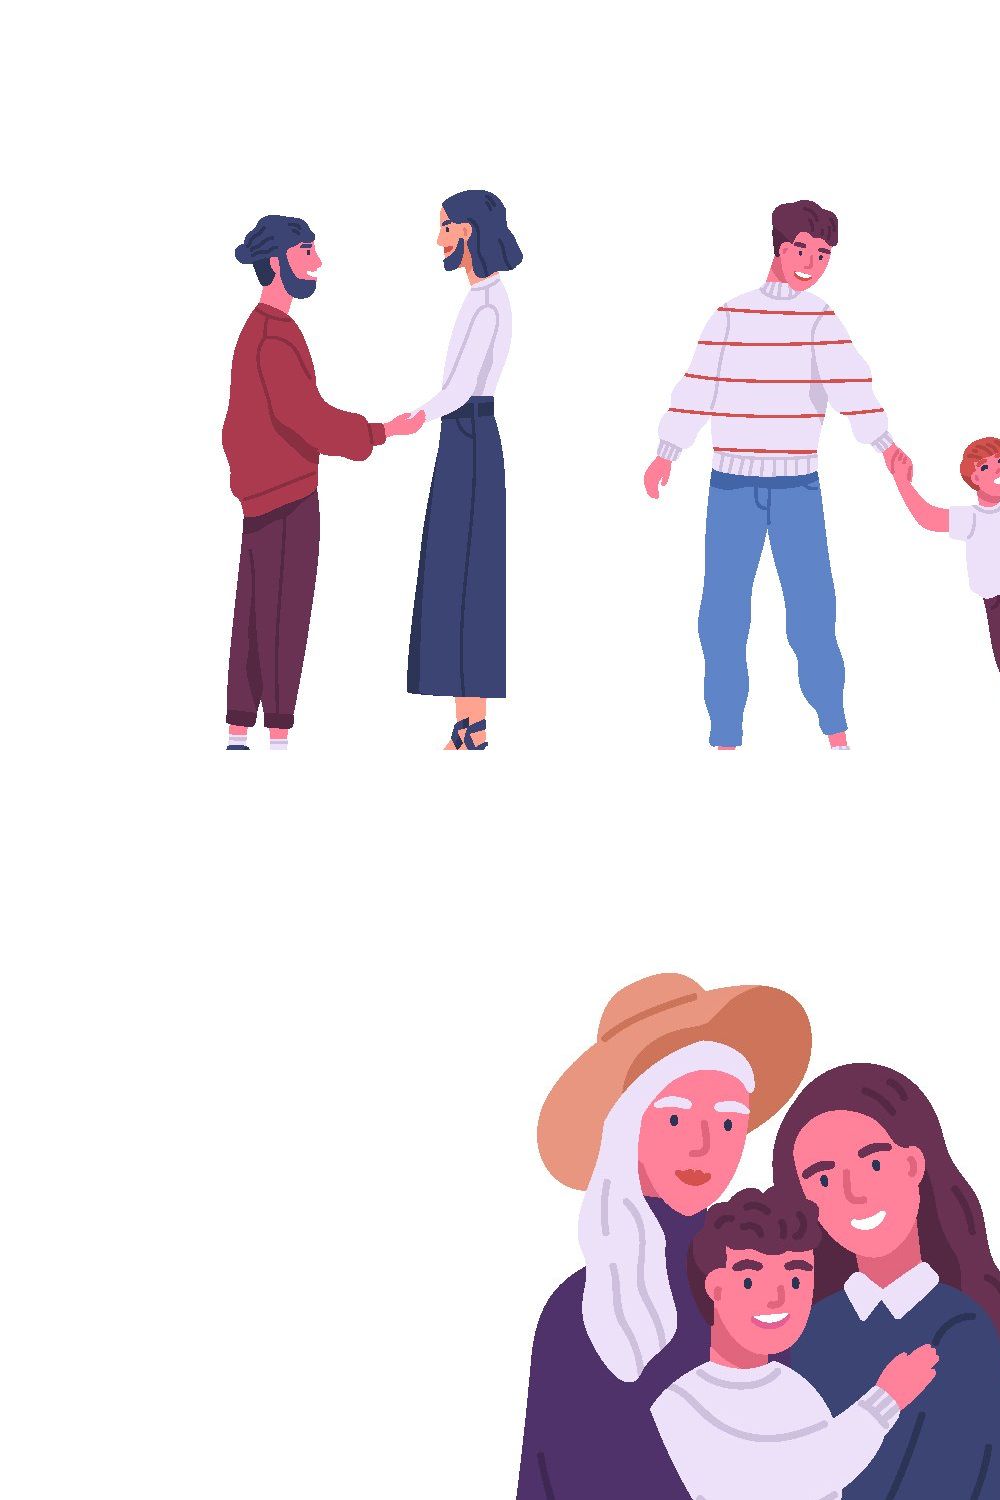 LGBTQ couples and families set pinterest preview image.